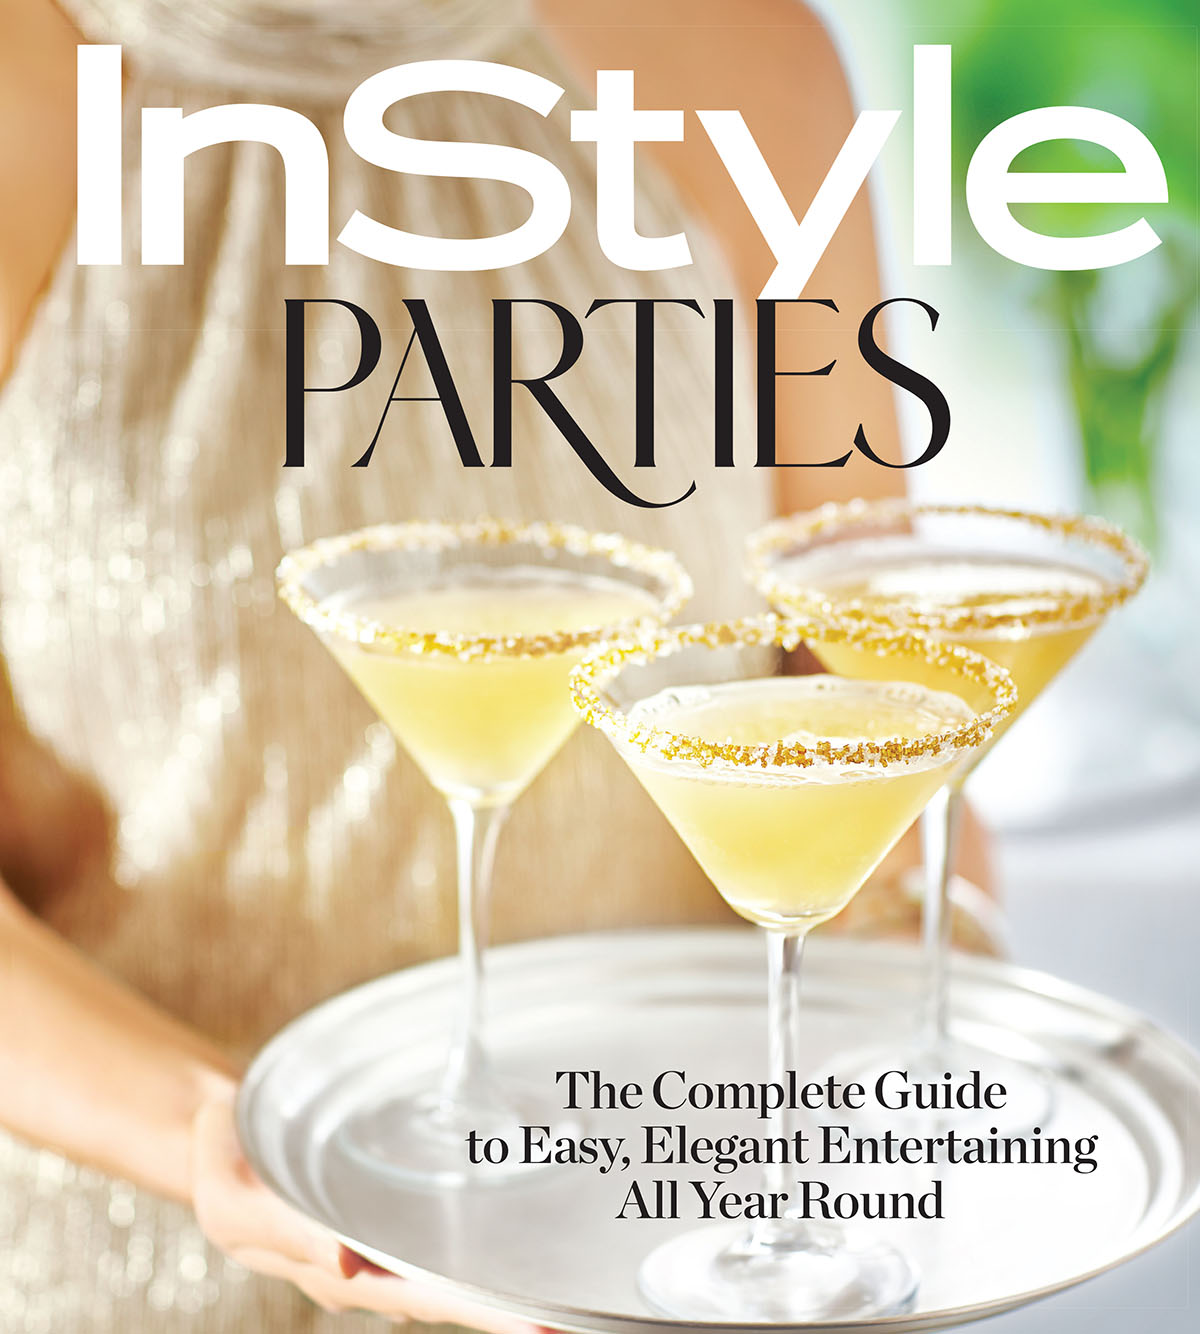 InStyle Parties